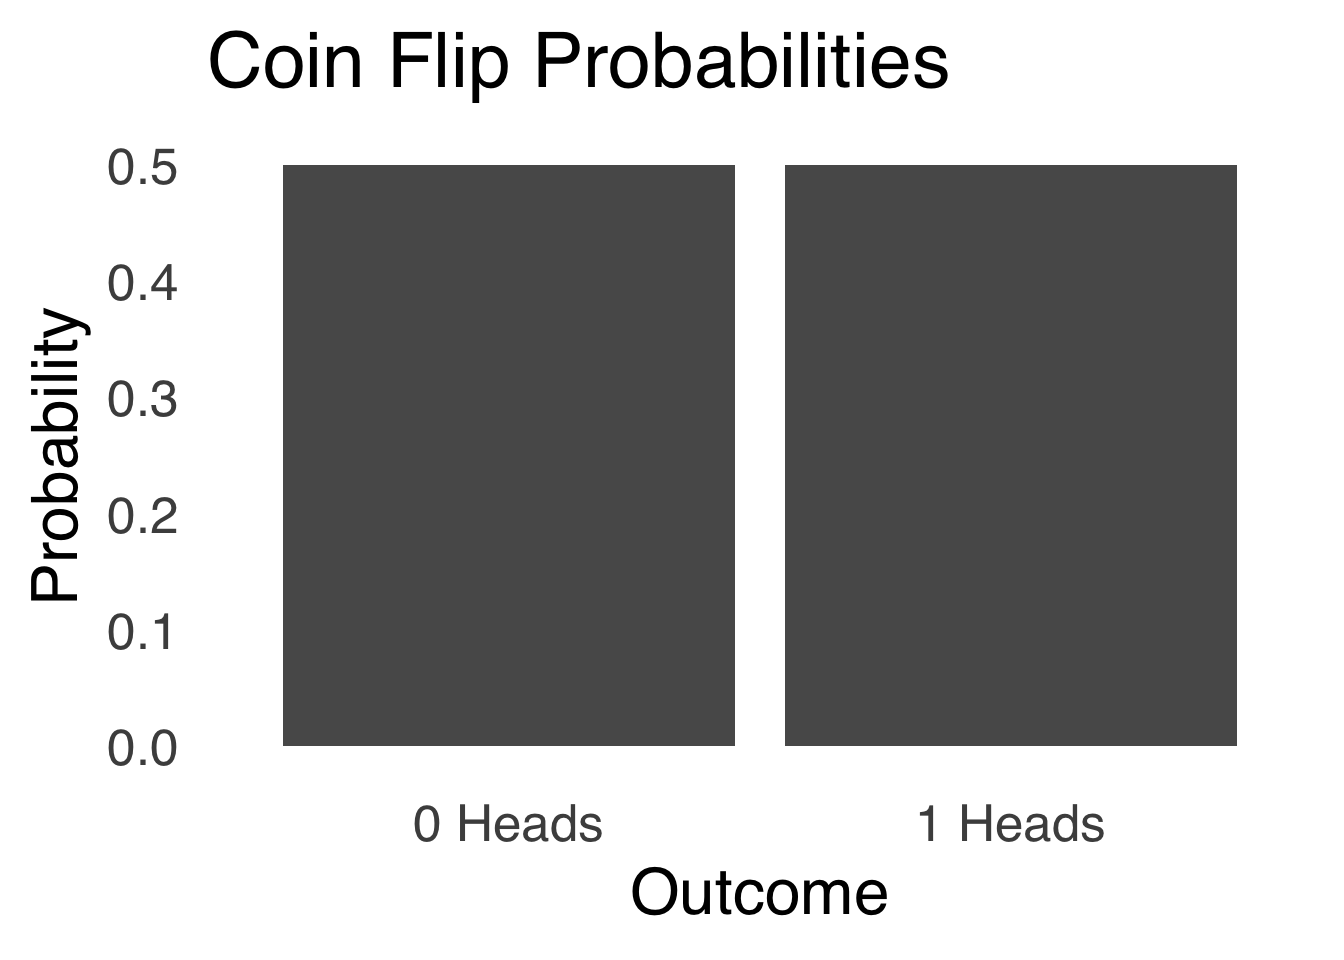 Binomial Distribution for a Coin Flip